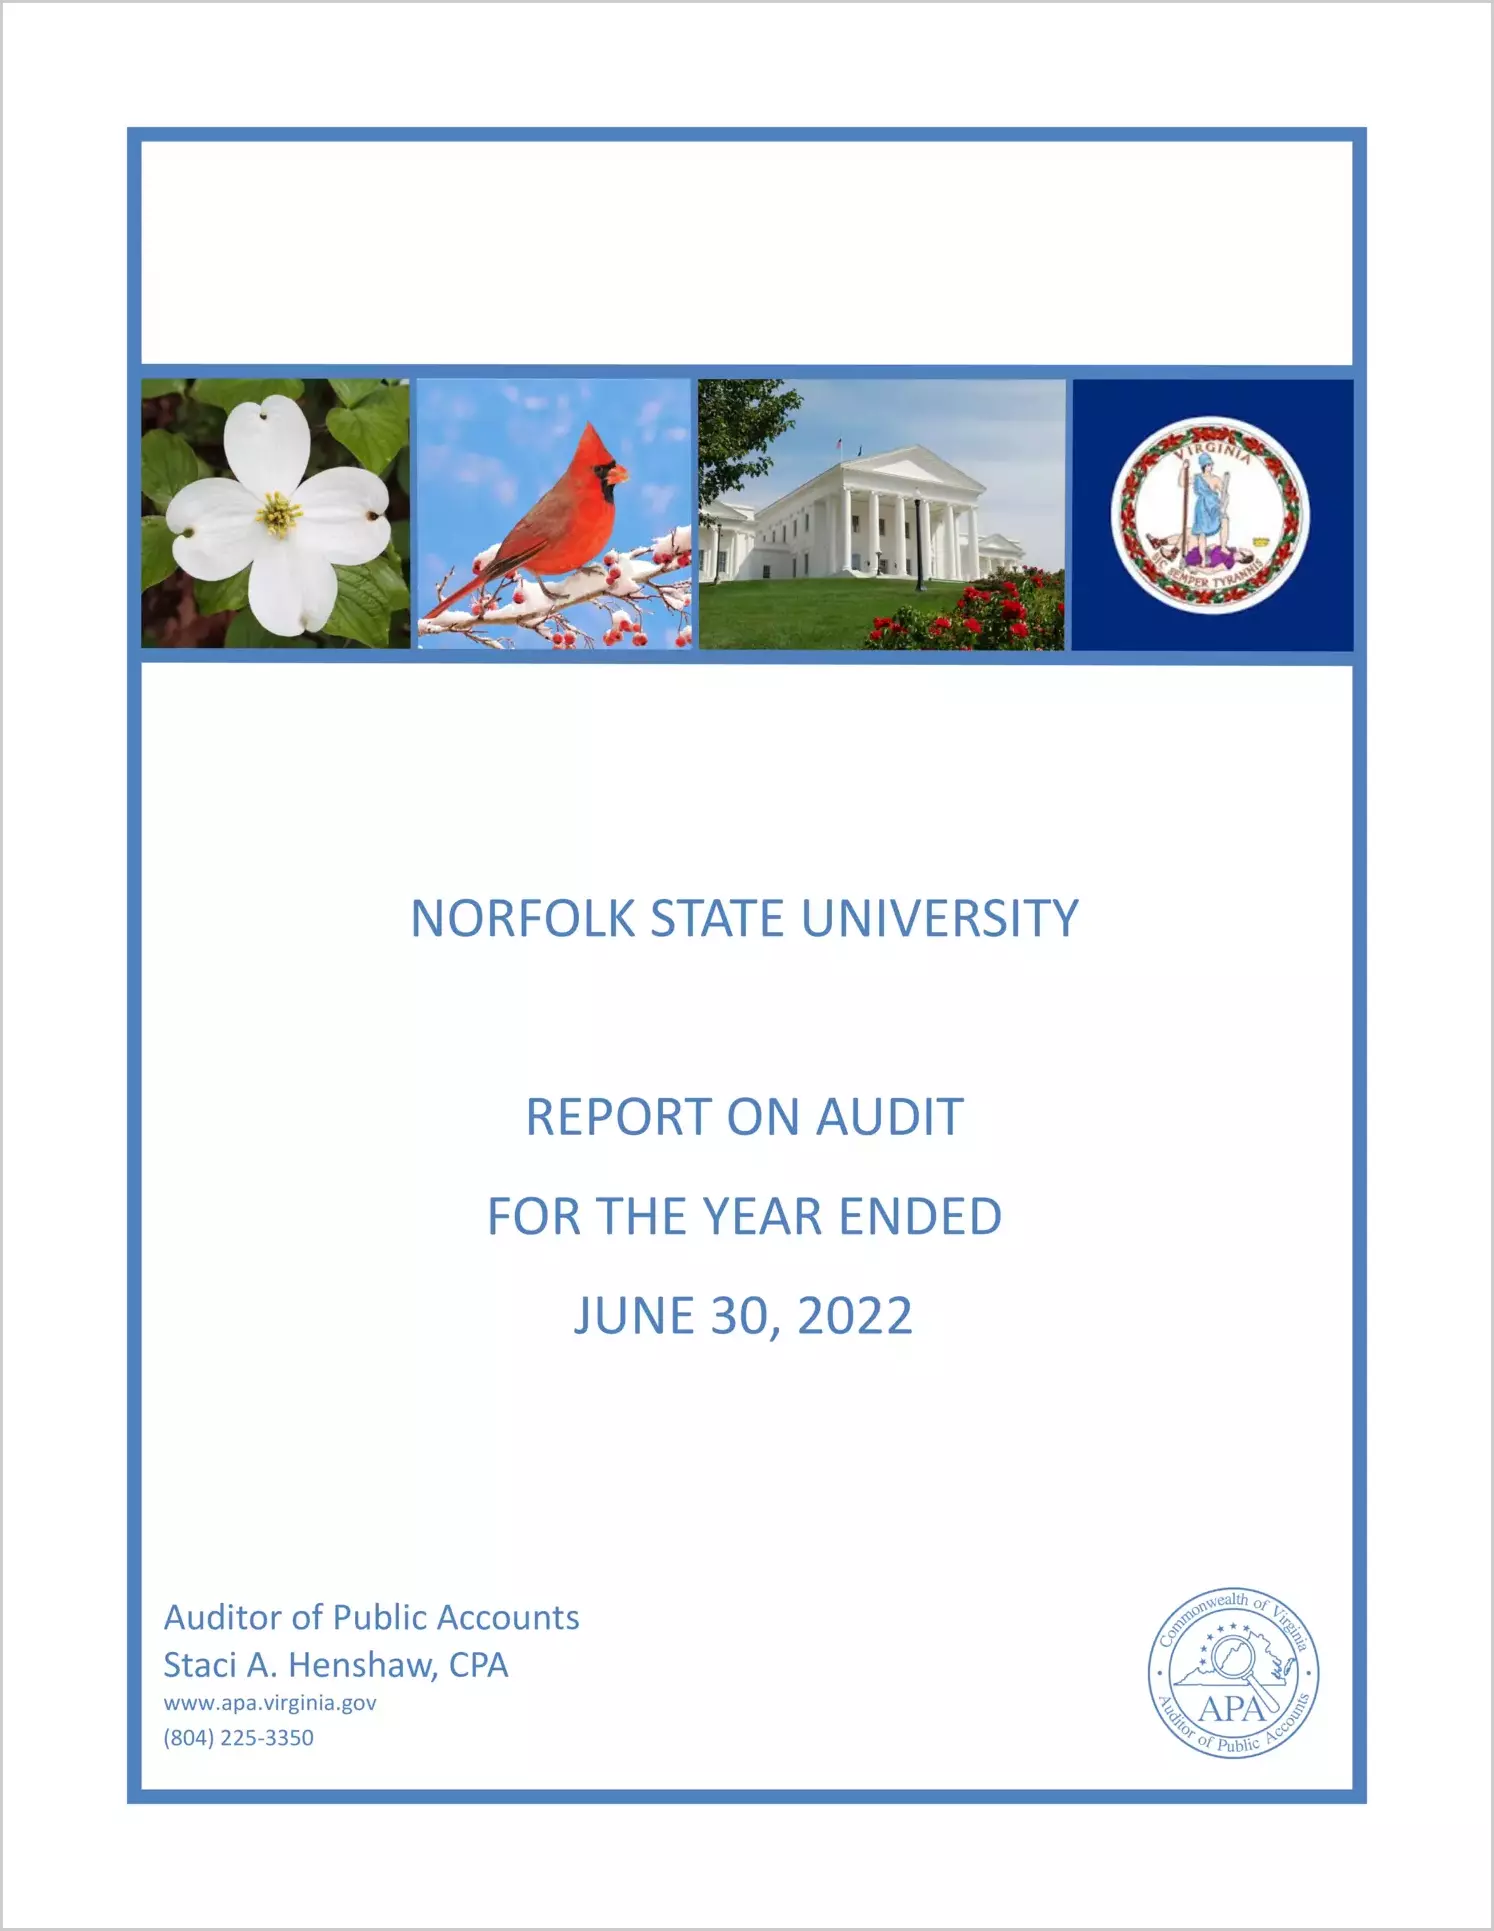 Norfolk State University for the year ended June 30, 2022